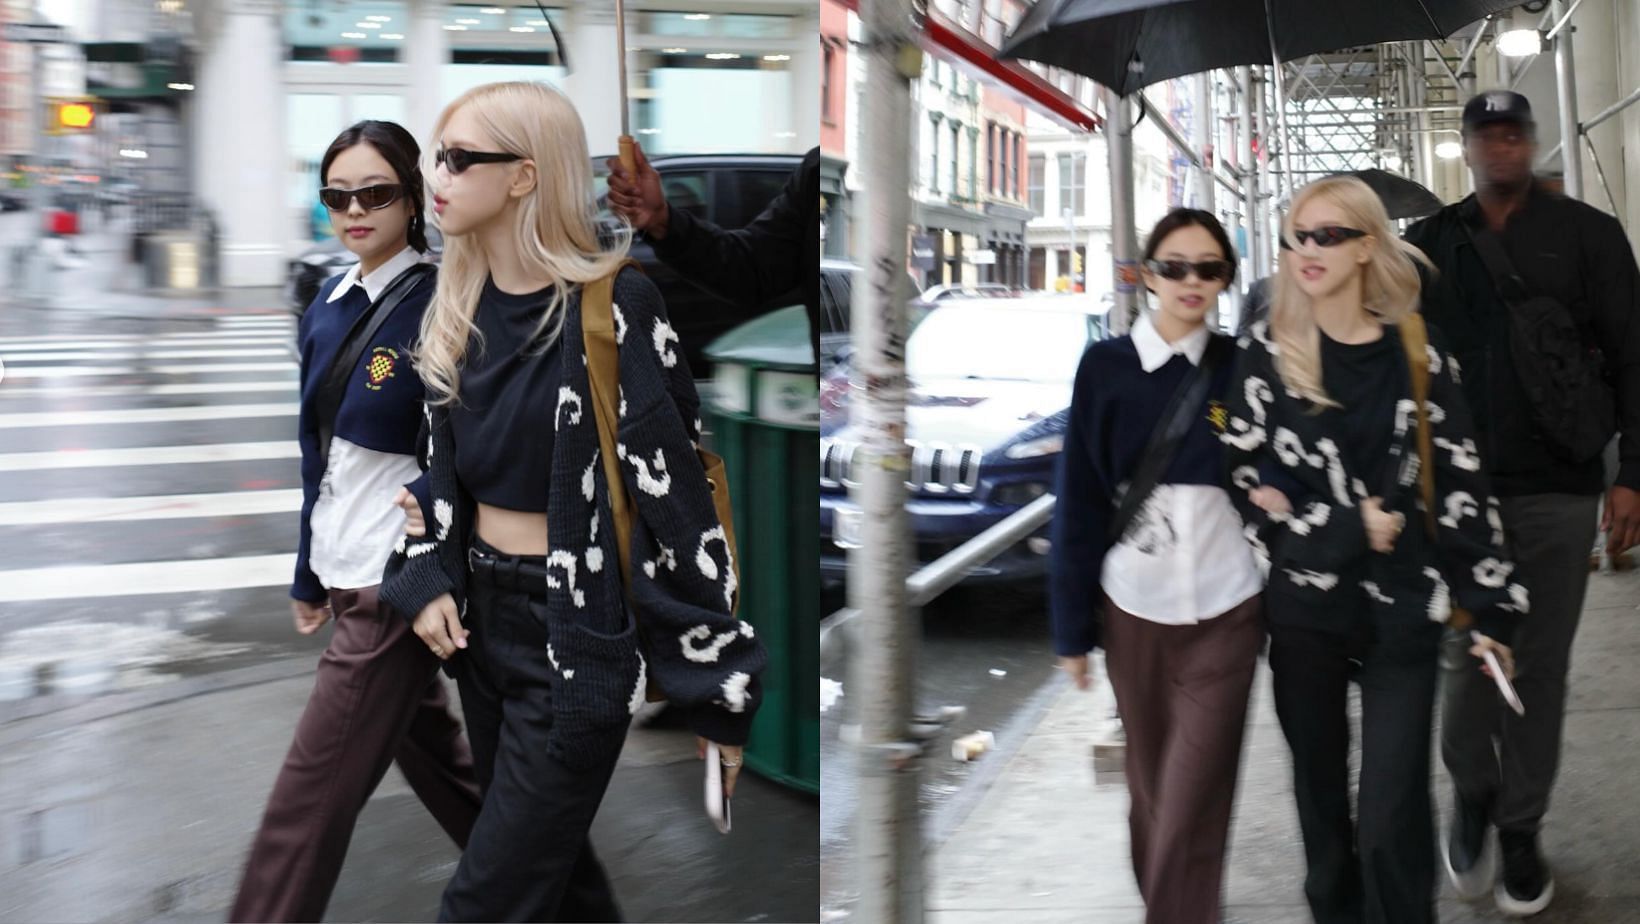 BLACKPINK&rsquo;s Jennie and Ros&eacute; seen hanging out together in New York. (Images via Instagram/@roses_are_rosie)